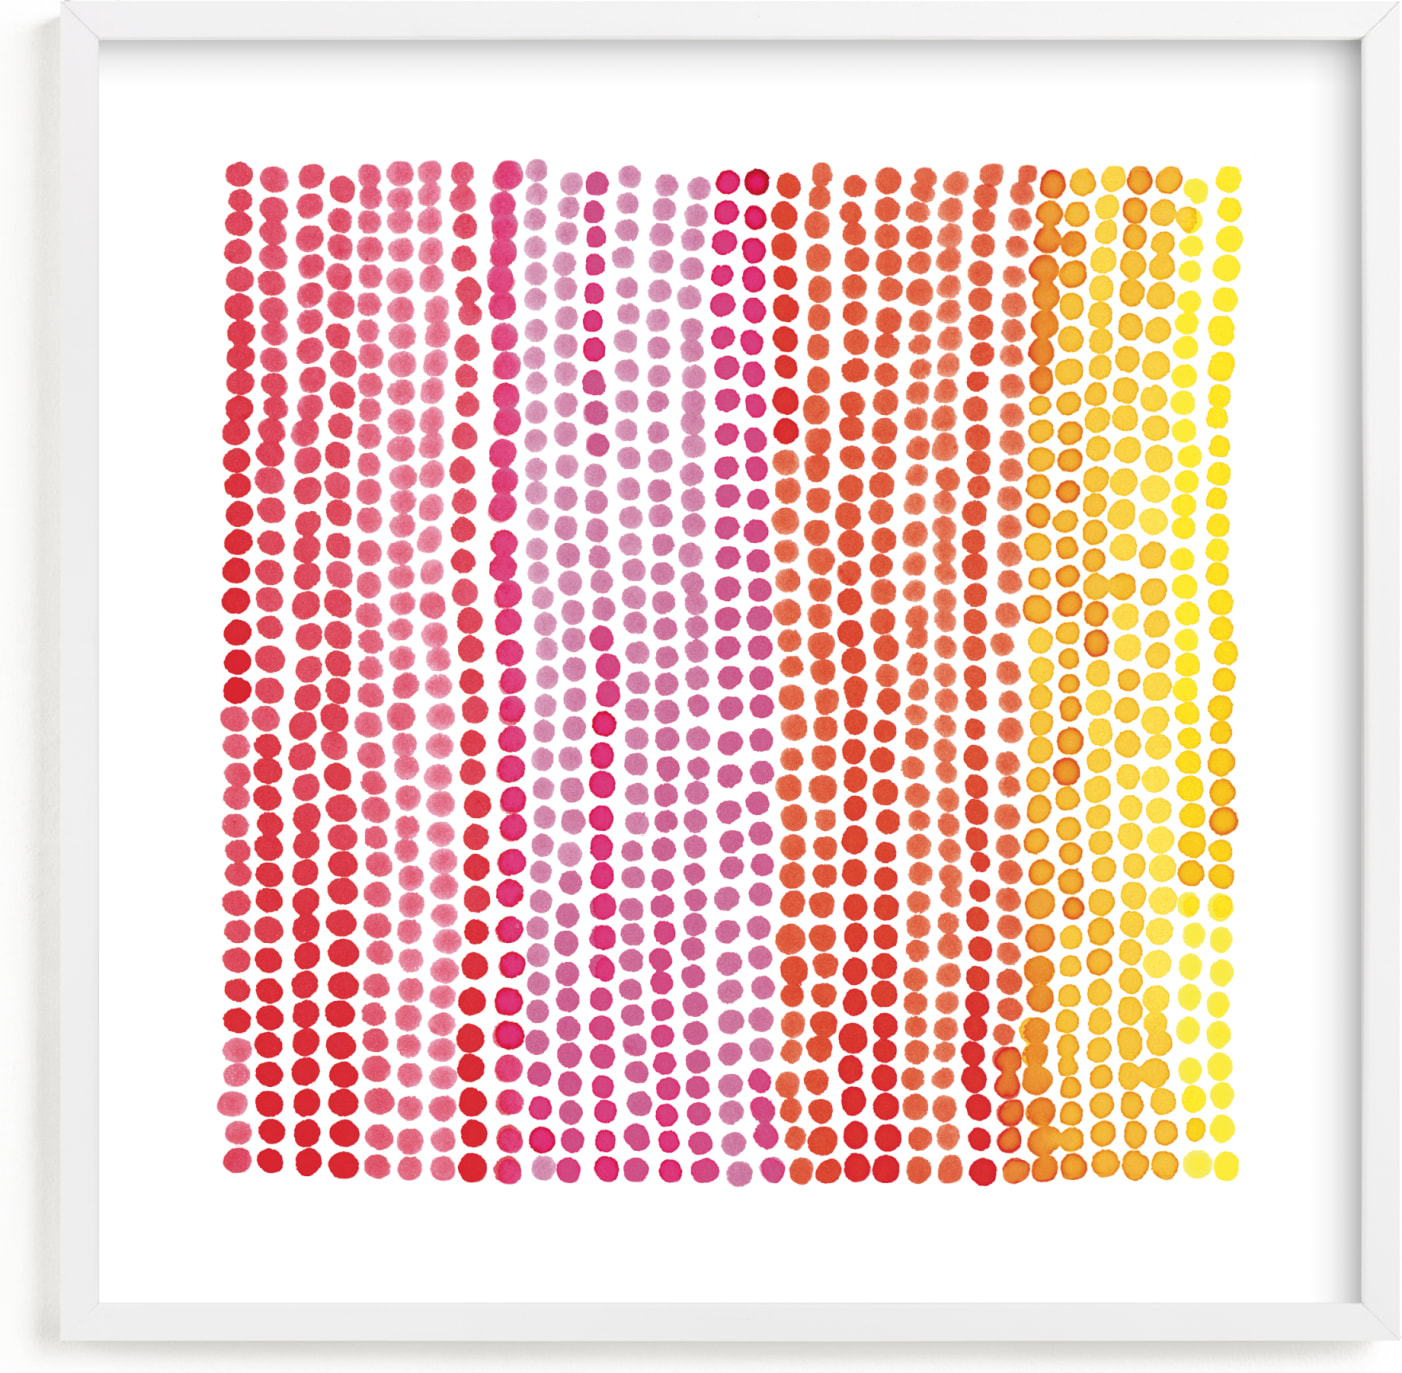 This is a yellow, orange, red kids wall art by Kerry Doyle called Rainbow Dots 1.